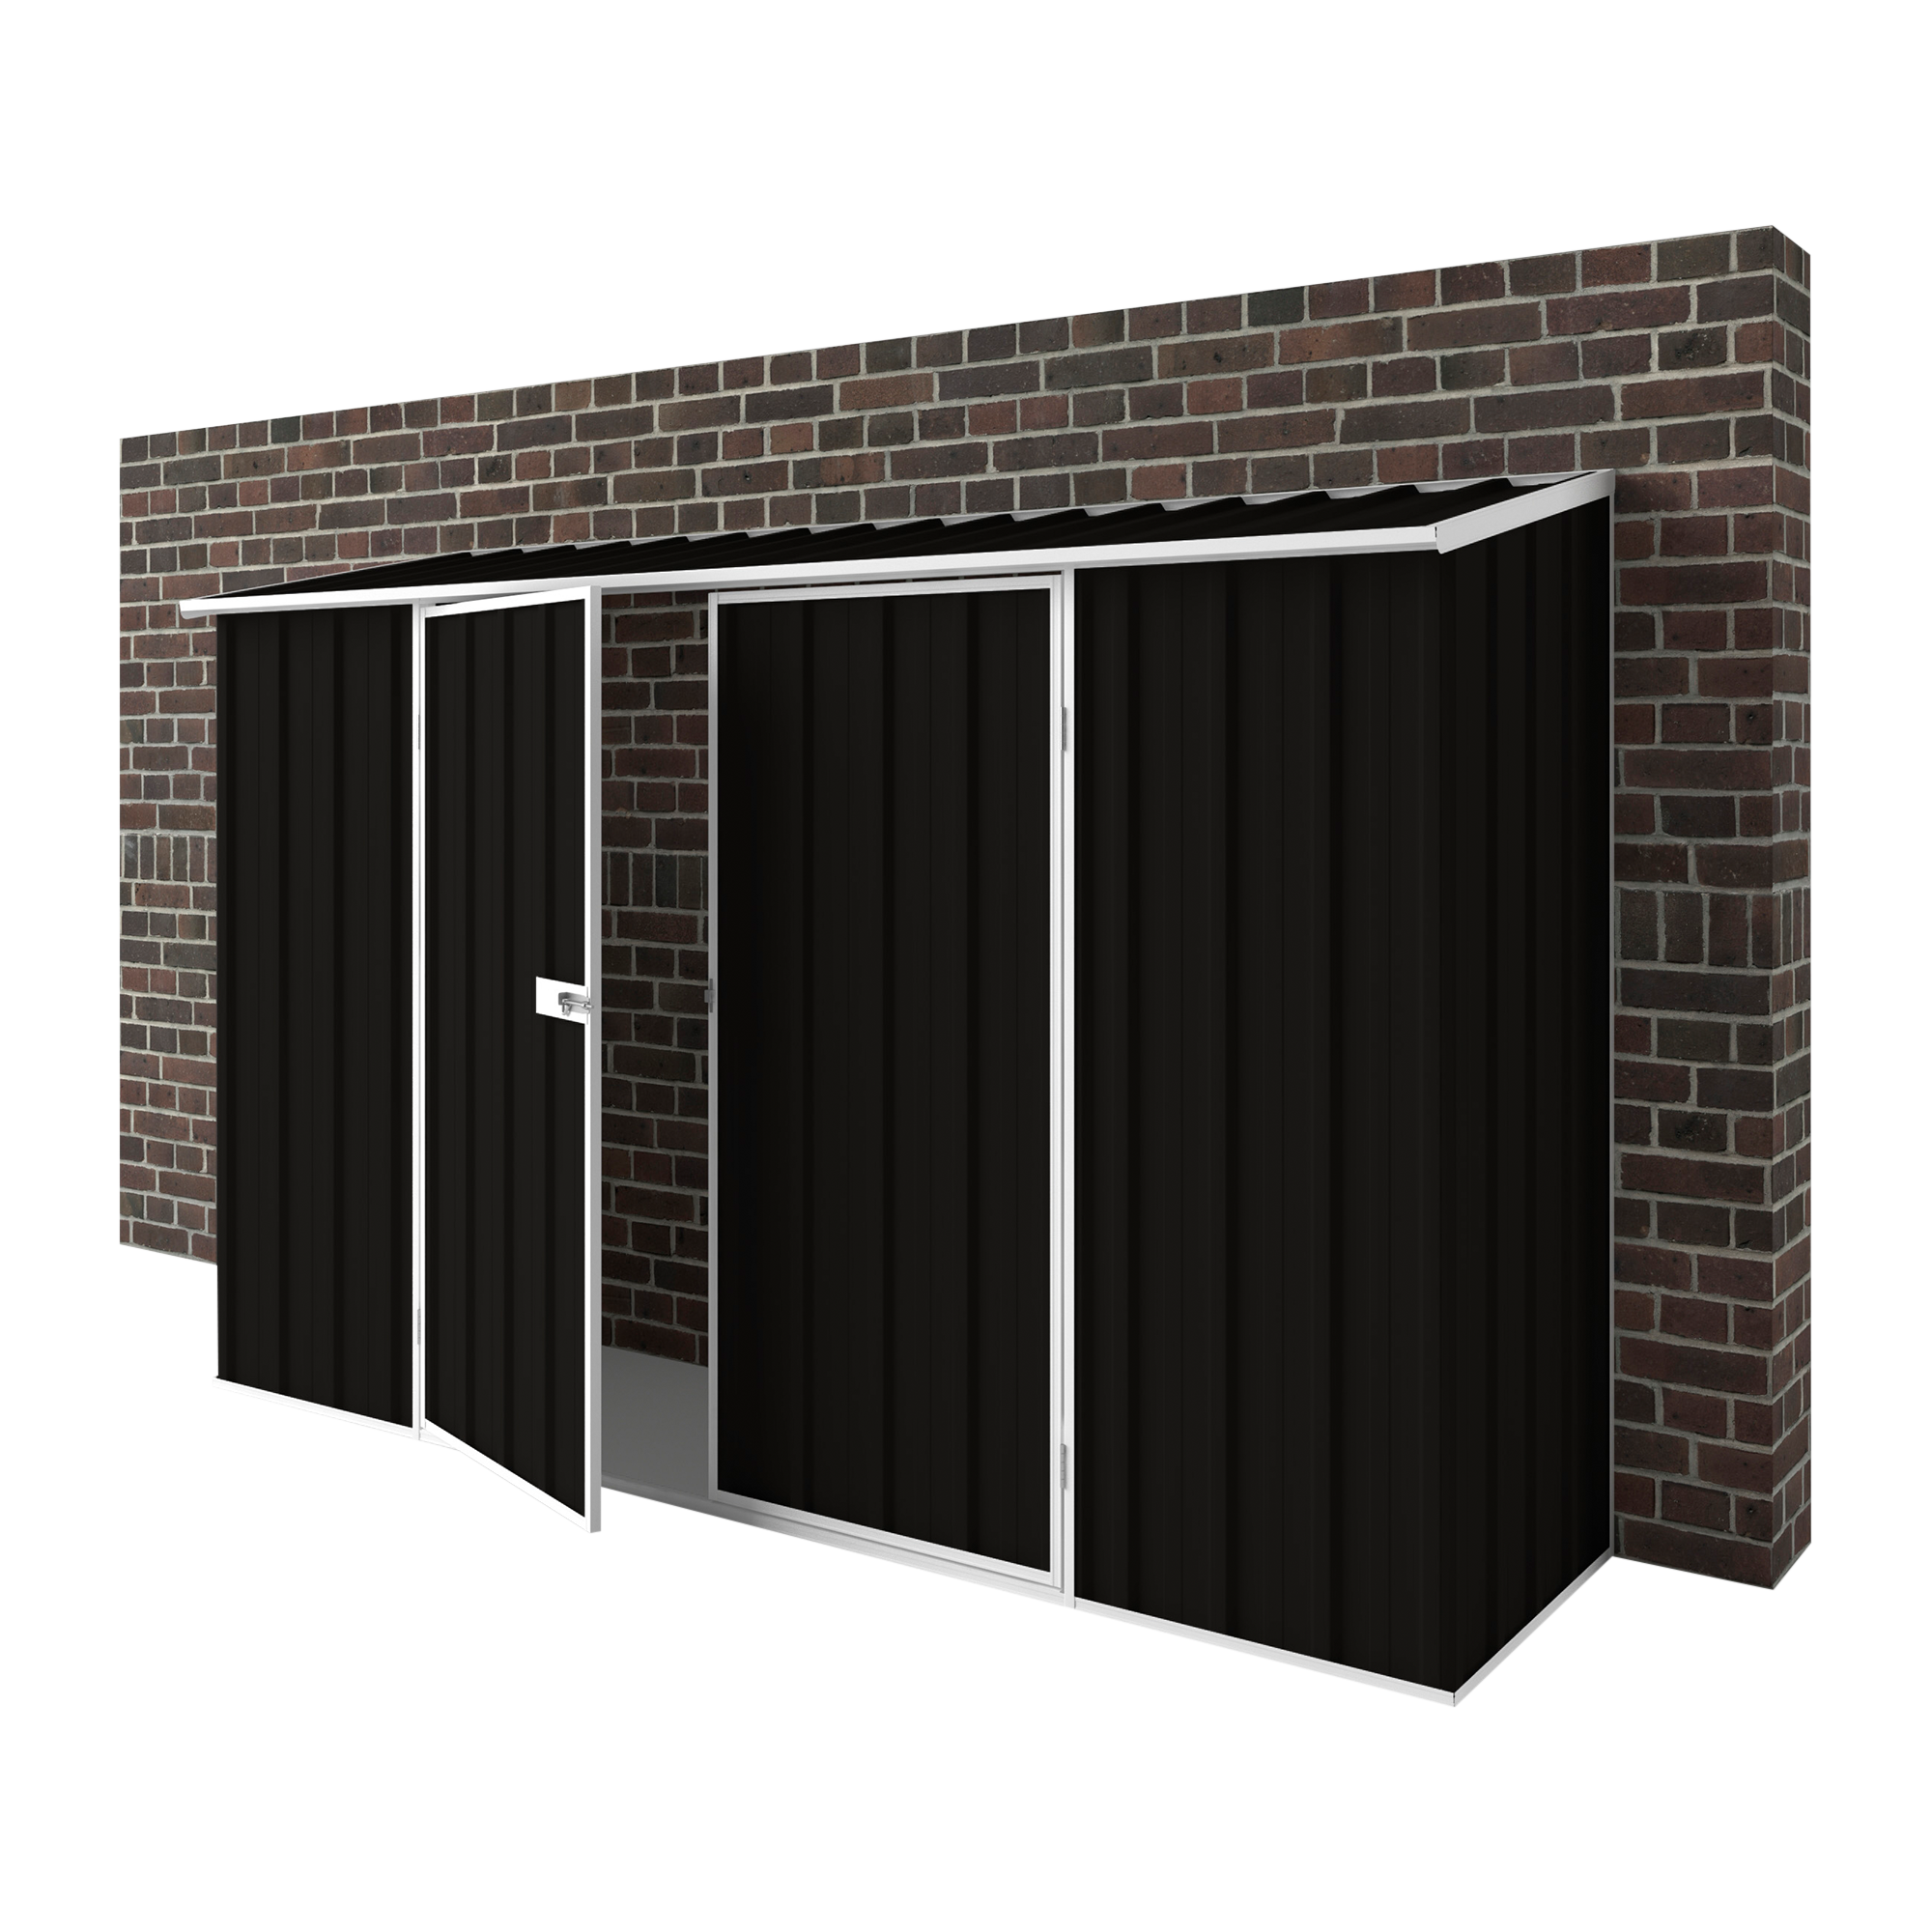 3m x 0.78m Off The Wall Garden Shed - EasyShed